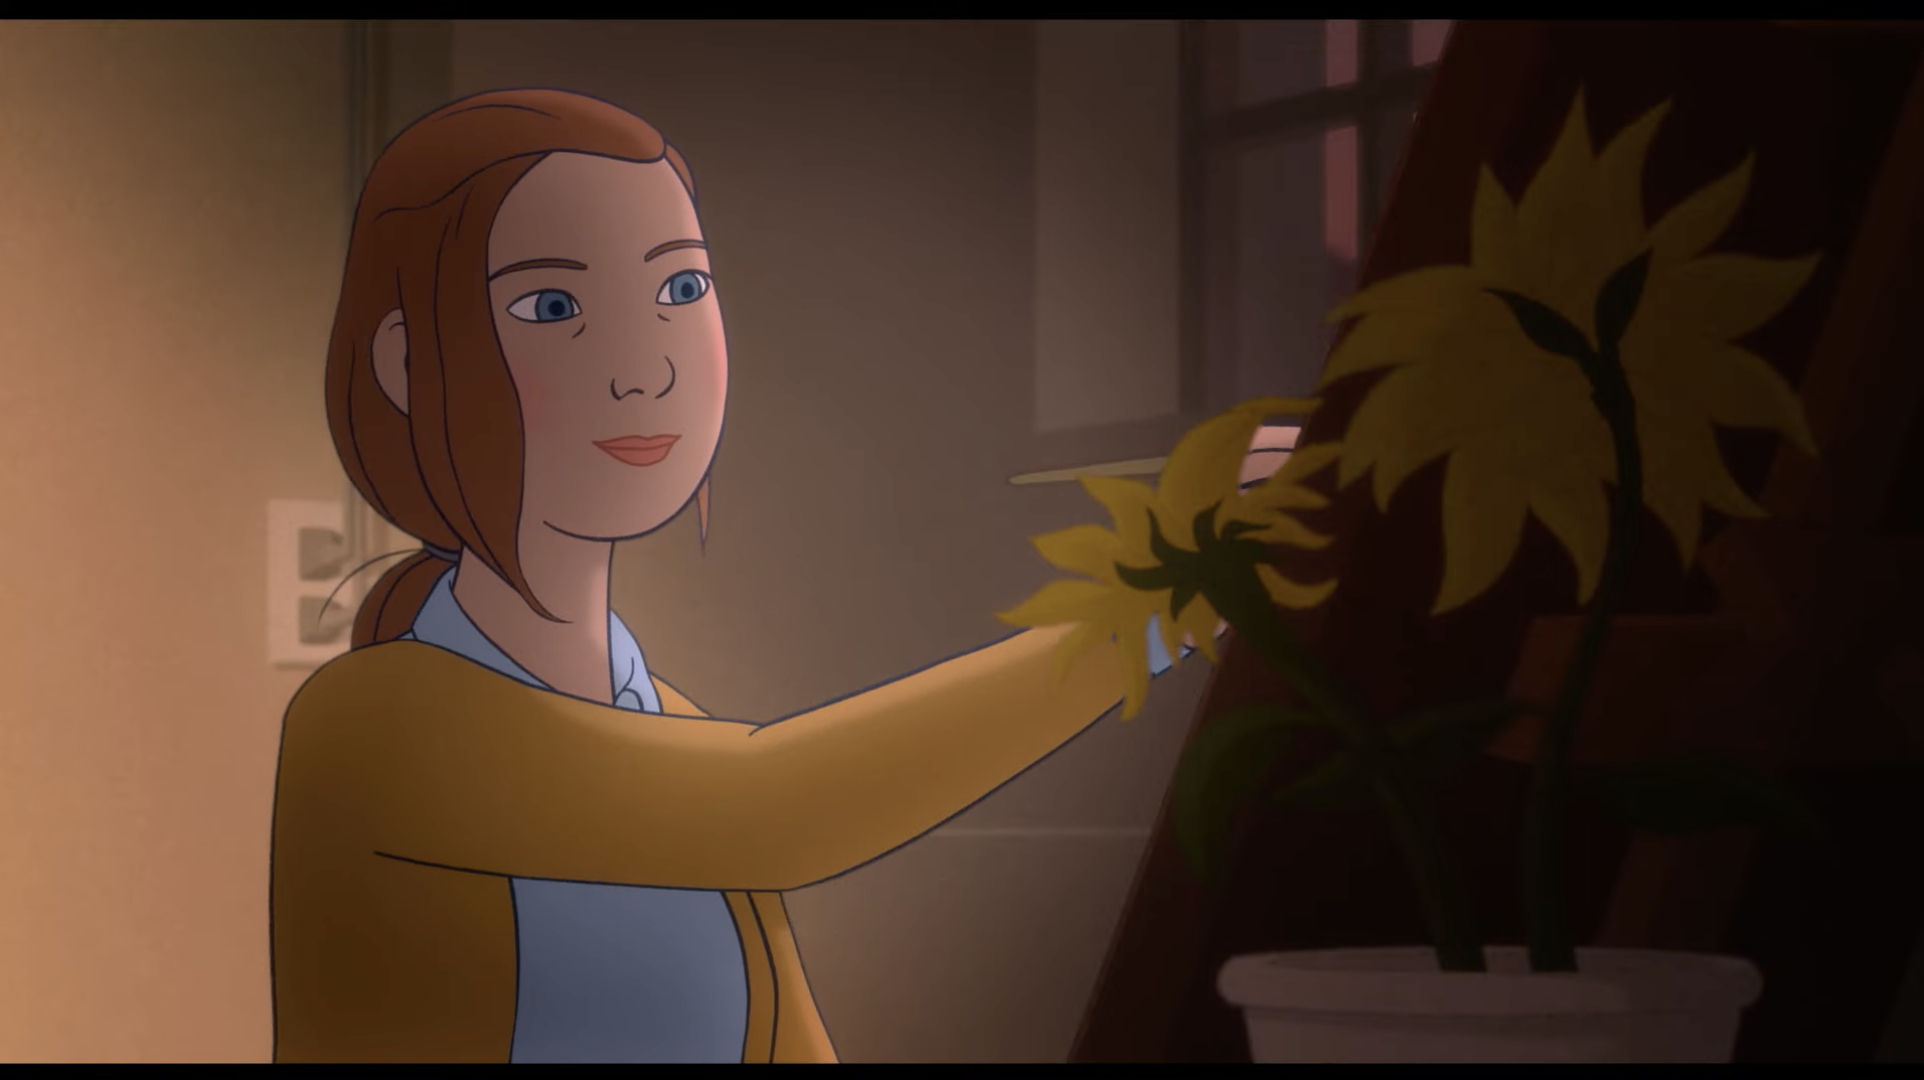 Still from the animated film Charlotte, depicting the main character painting.